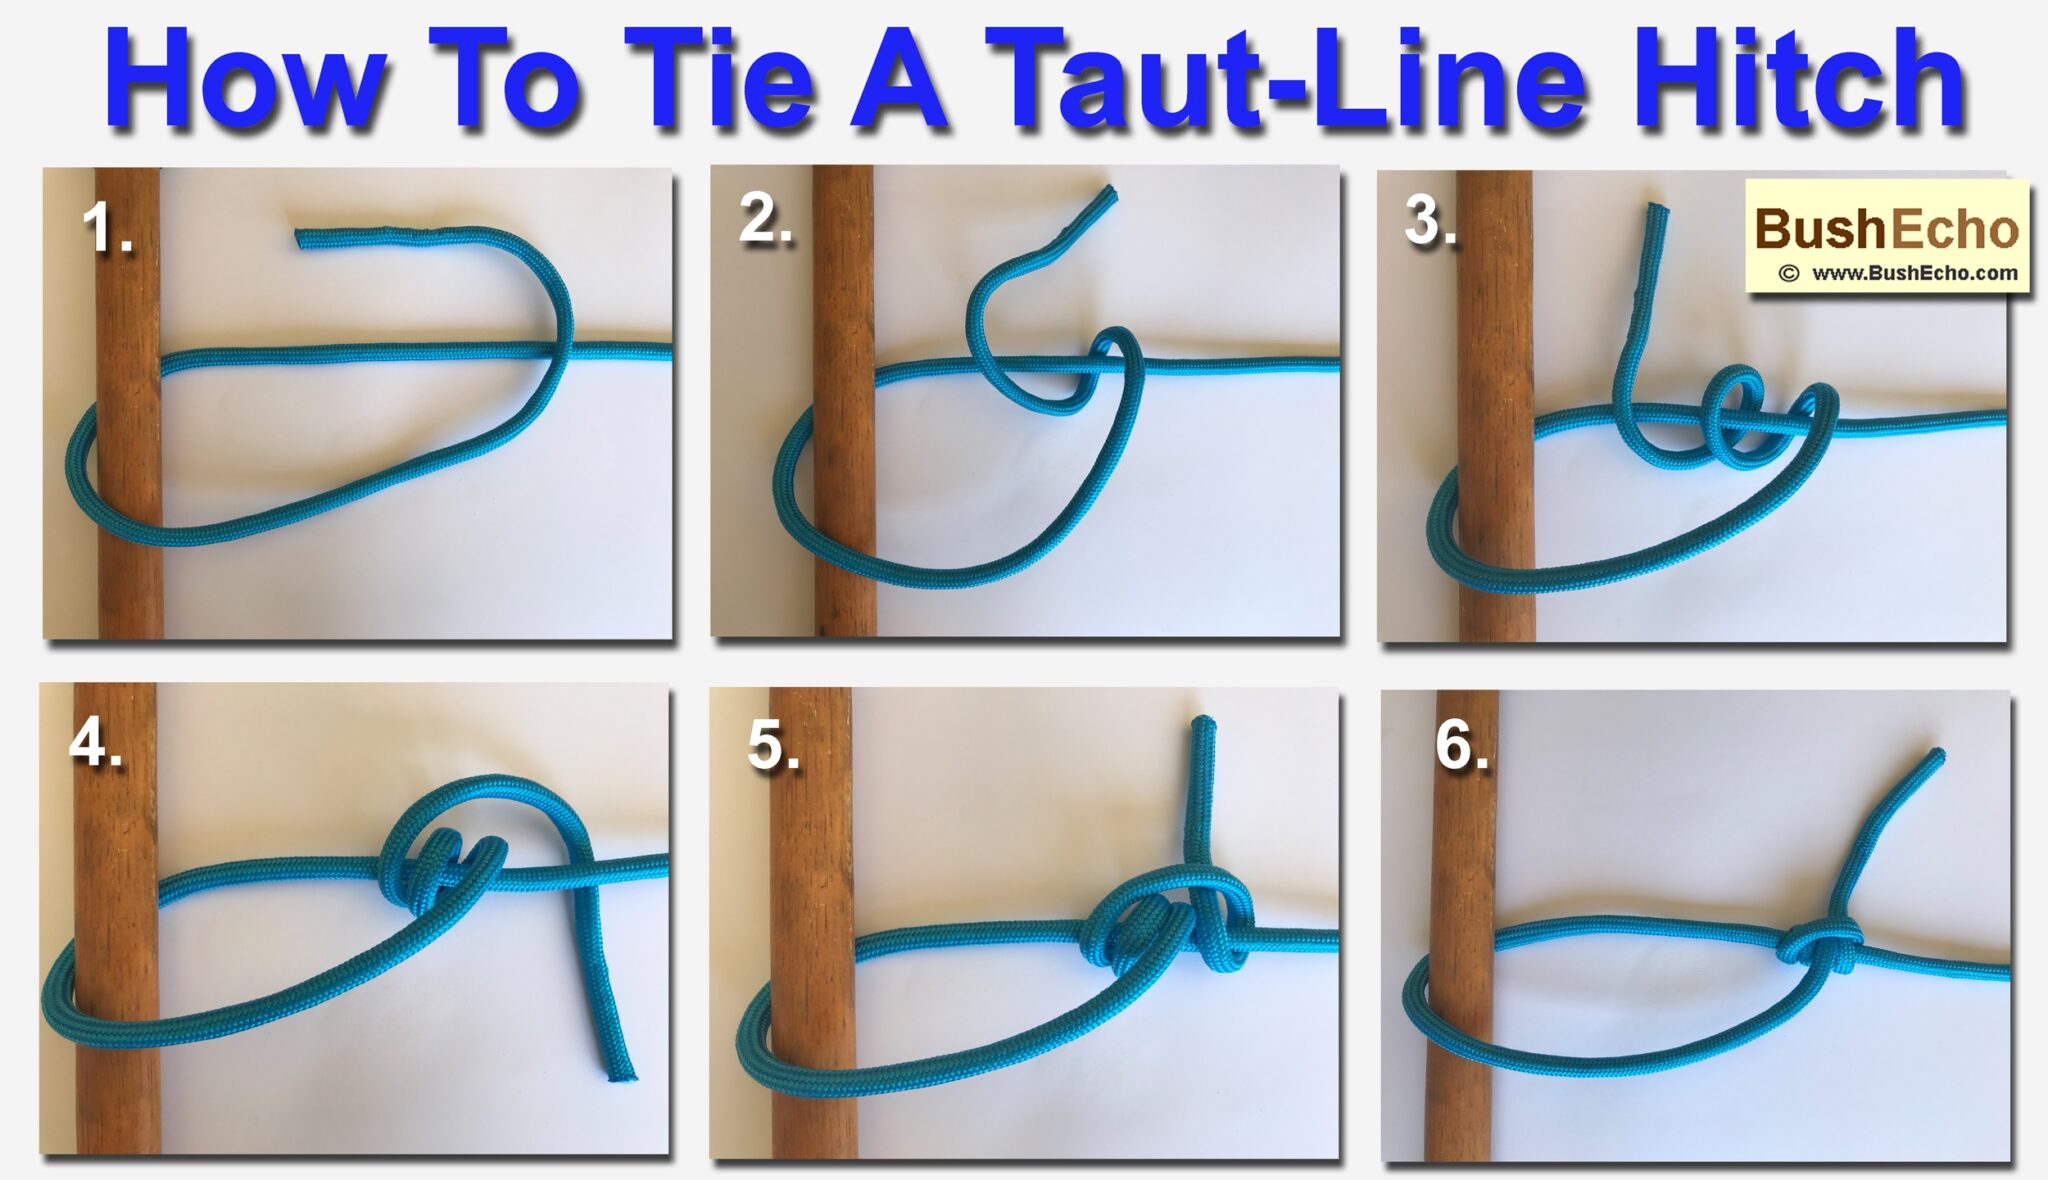 How To Tie A TautLine Hitch BushEcho